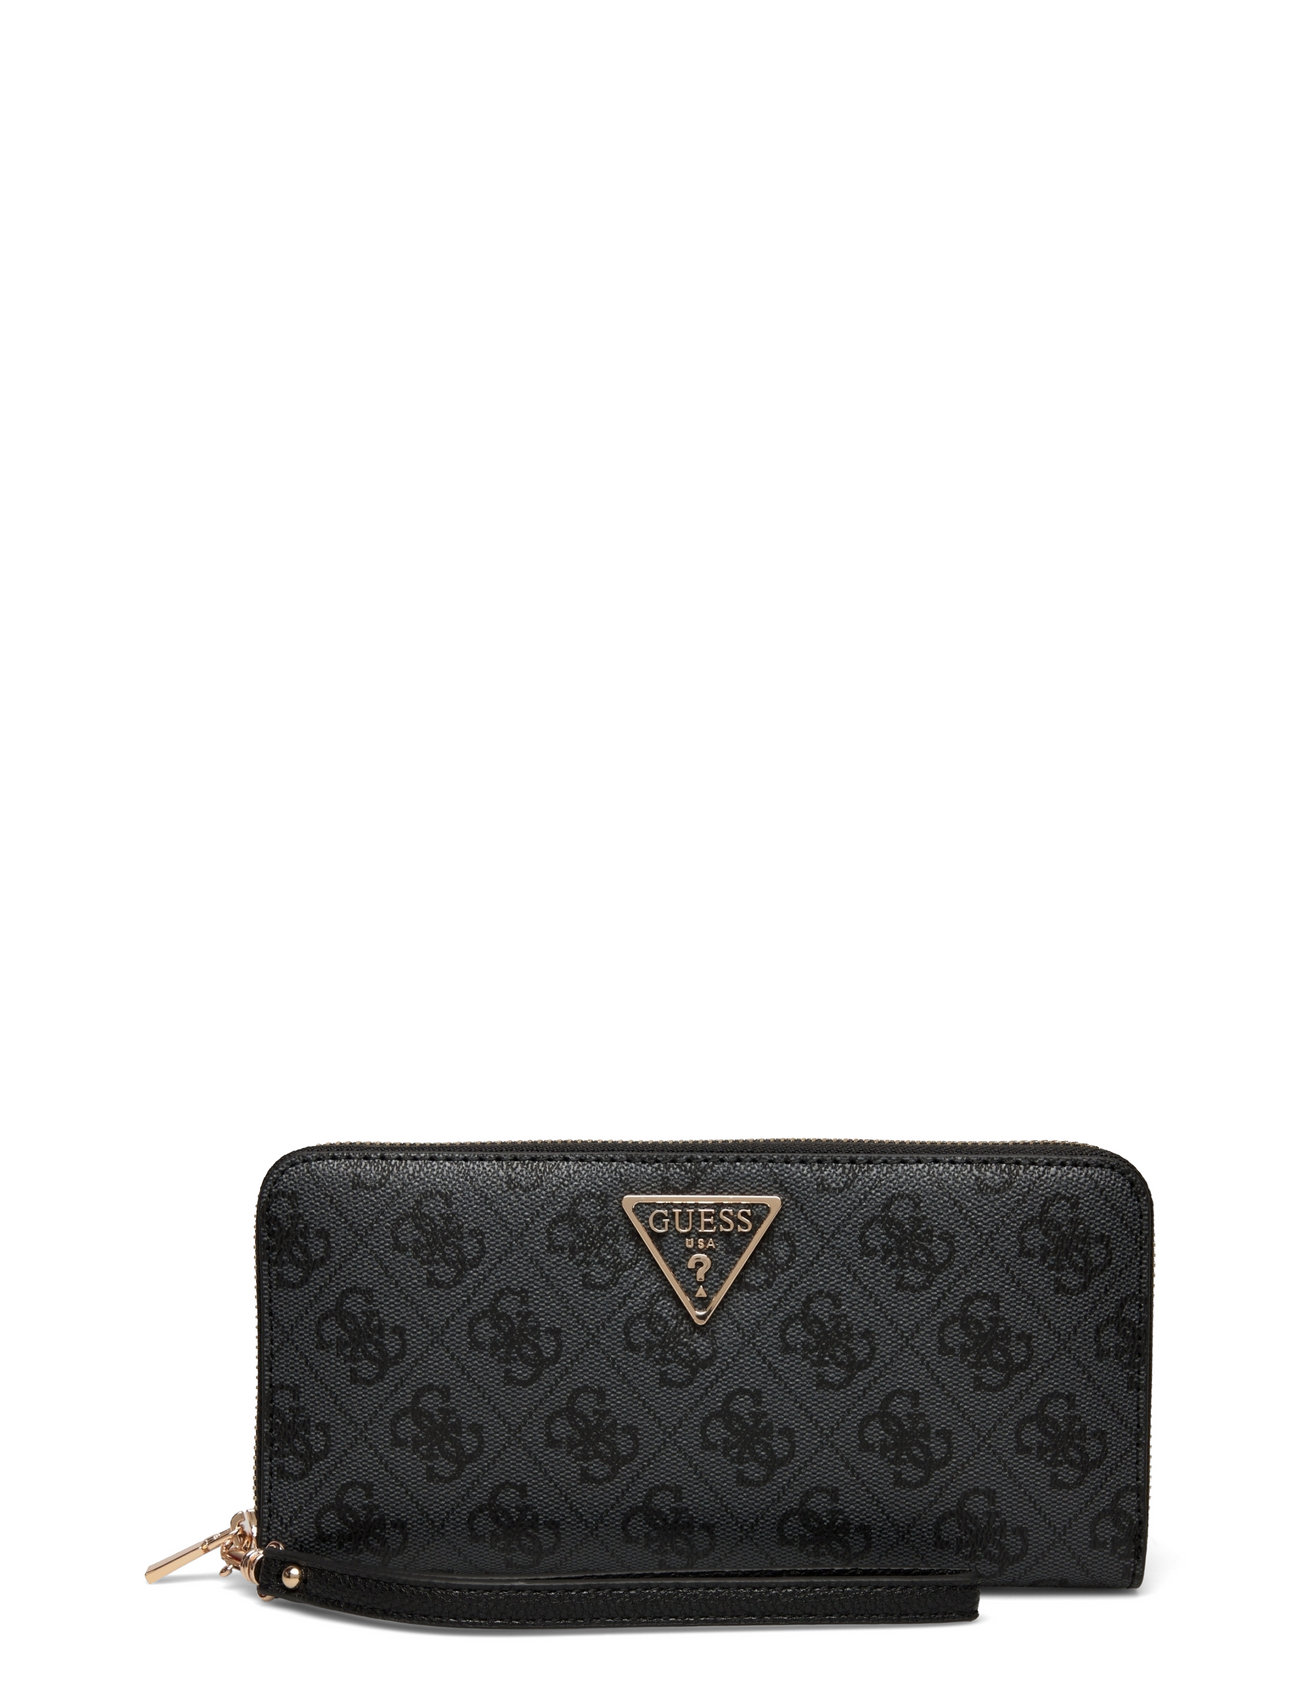 GUESS Laurel Slg Large Zip Around - Wallets - Boozt.com